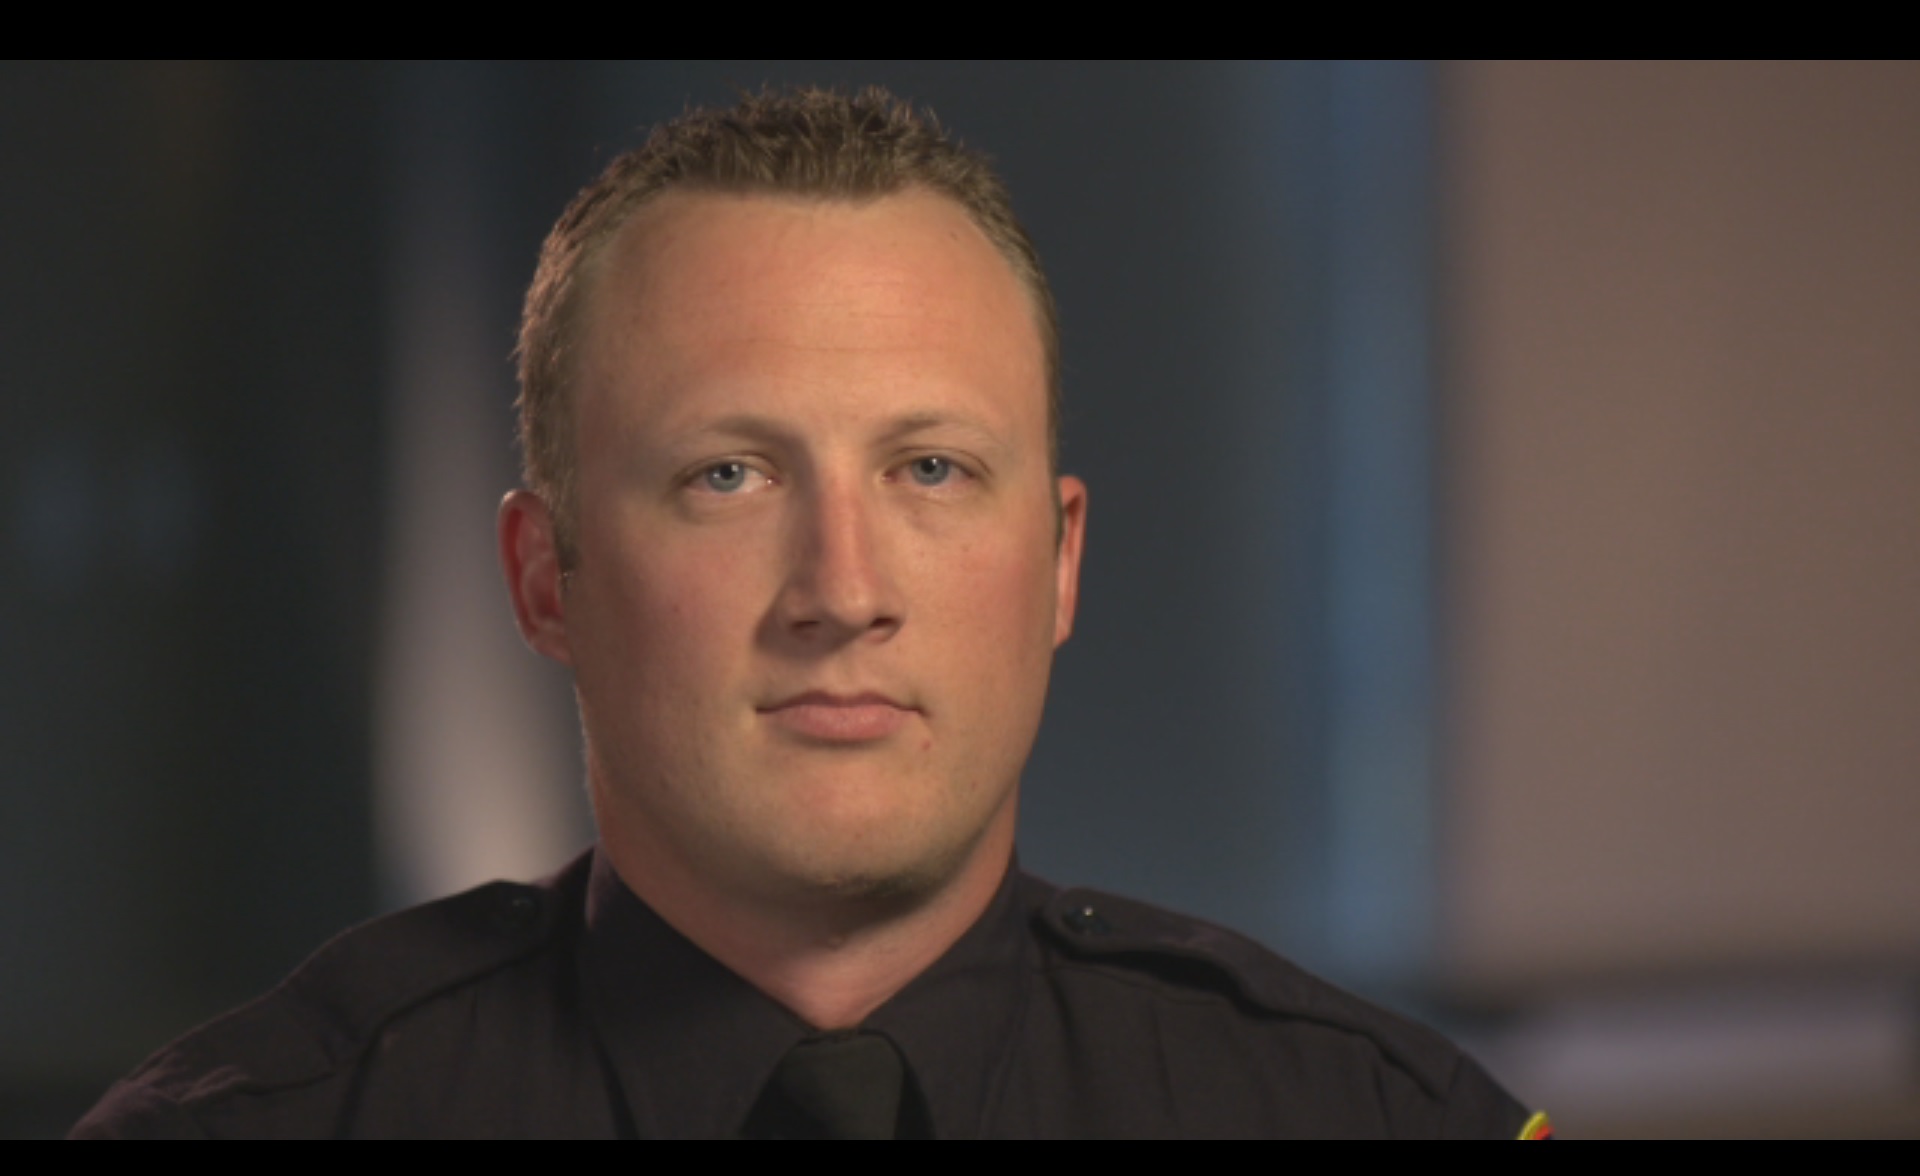 Officer Andy Adams with the Santa Rosa Police Department is seen here during an interview with "Nightline."